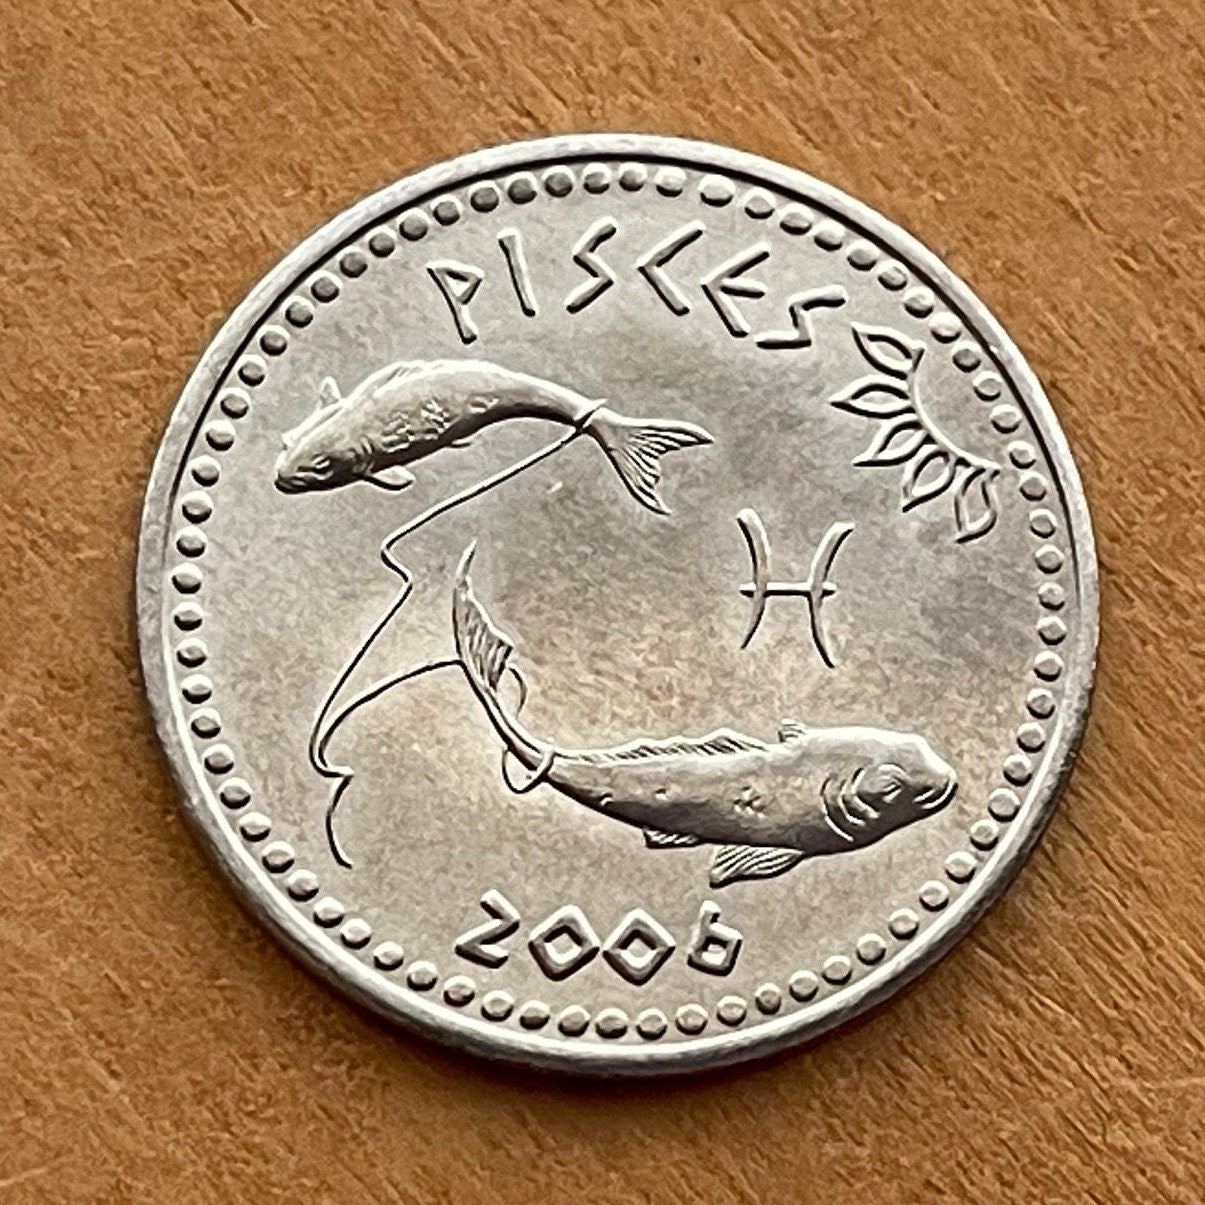 Pisces the Fish 10 Shillings Somaliland Authentic Coin Money for Jewelry and Craft Making (Zodiac Series) (Astrology) (Christian Era)